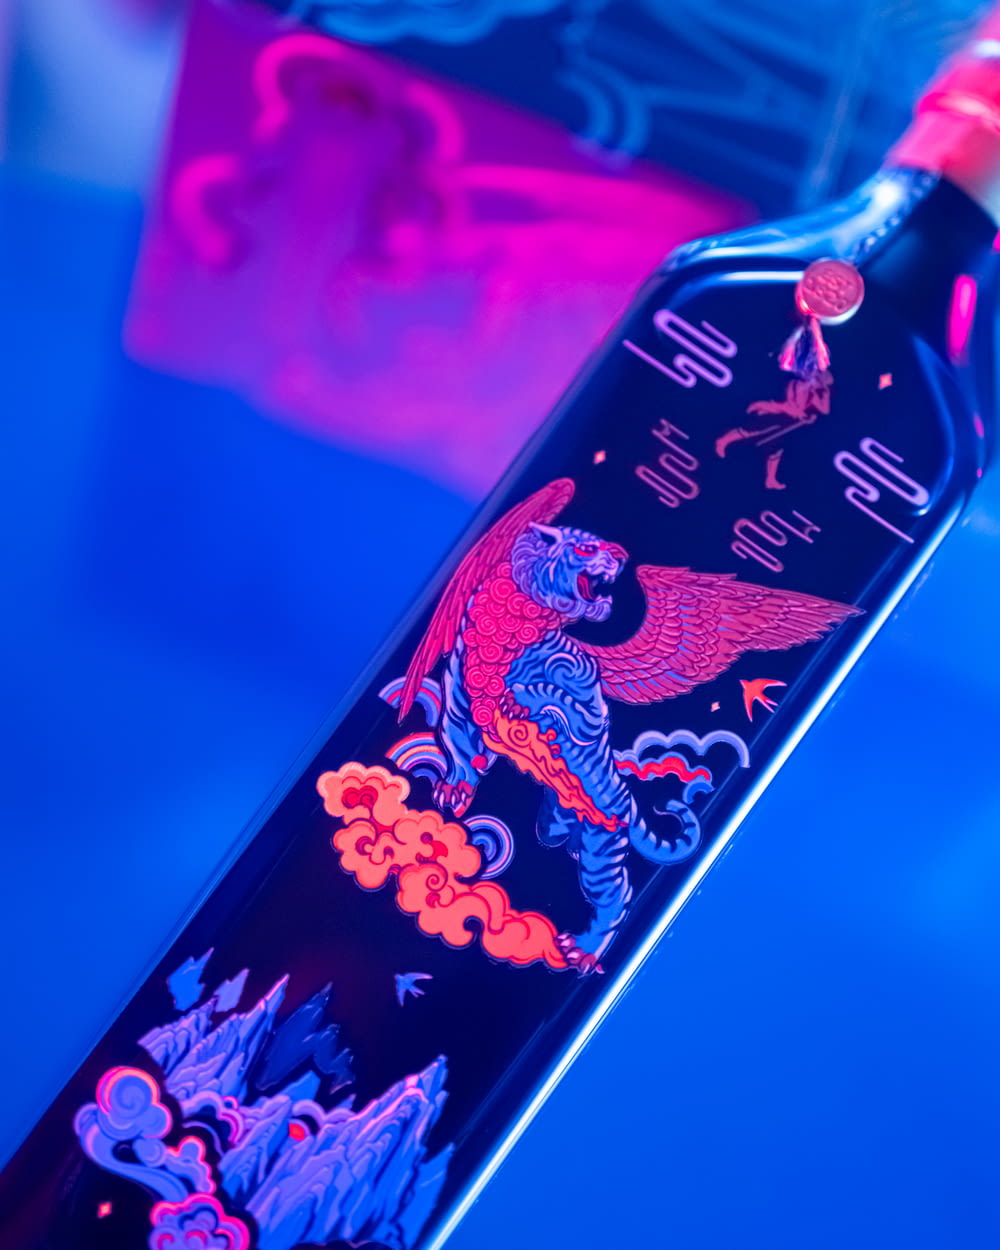 a bottle of liquor with a dragon design on it